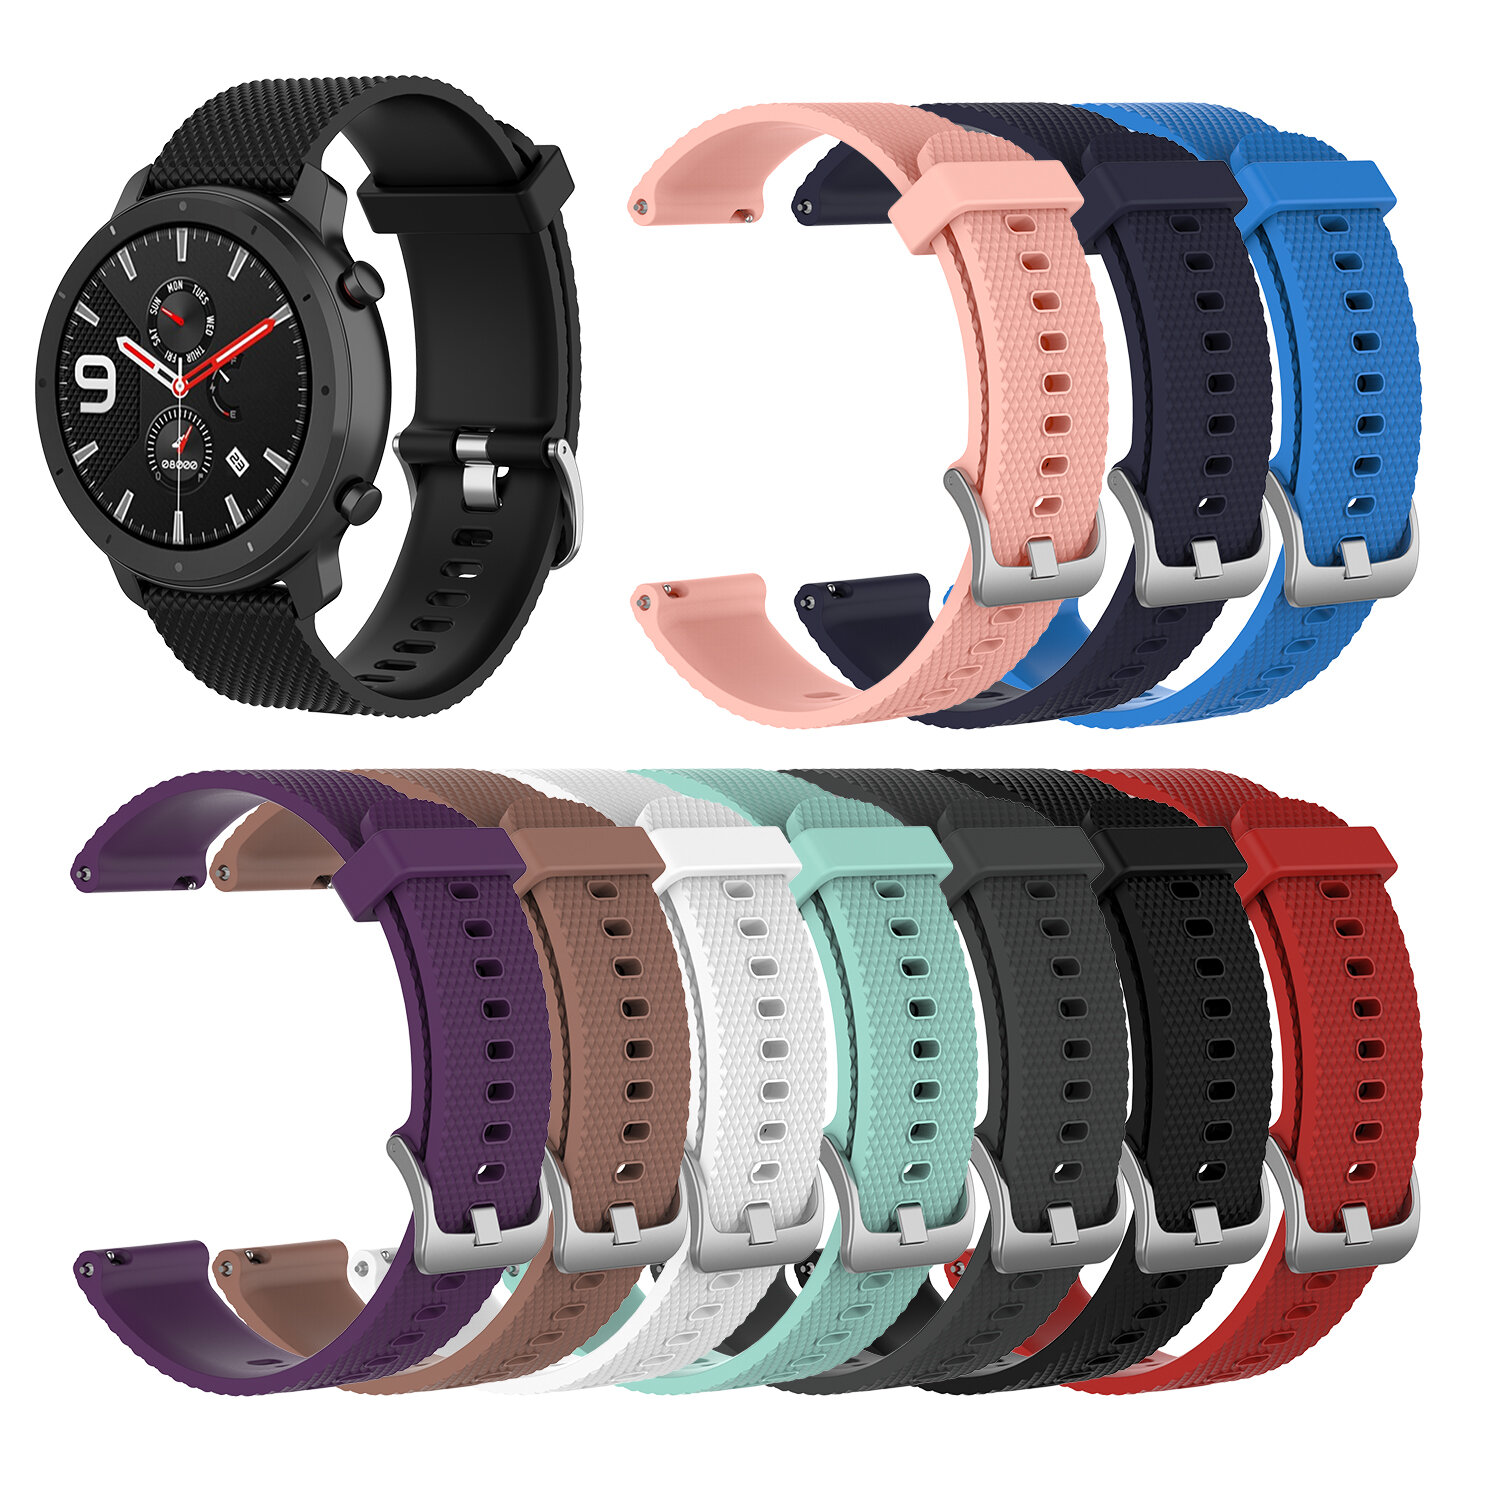 

Bakeey 22mm Texture Silicone Replacement Strap Smart Watch Band For Amazfit GTR 47MM